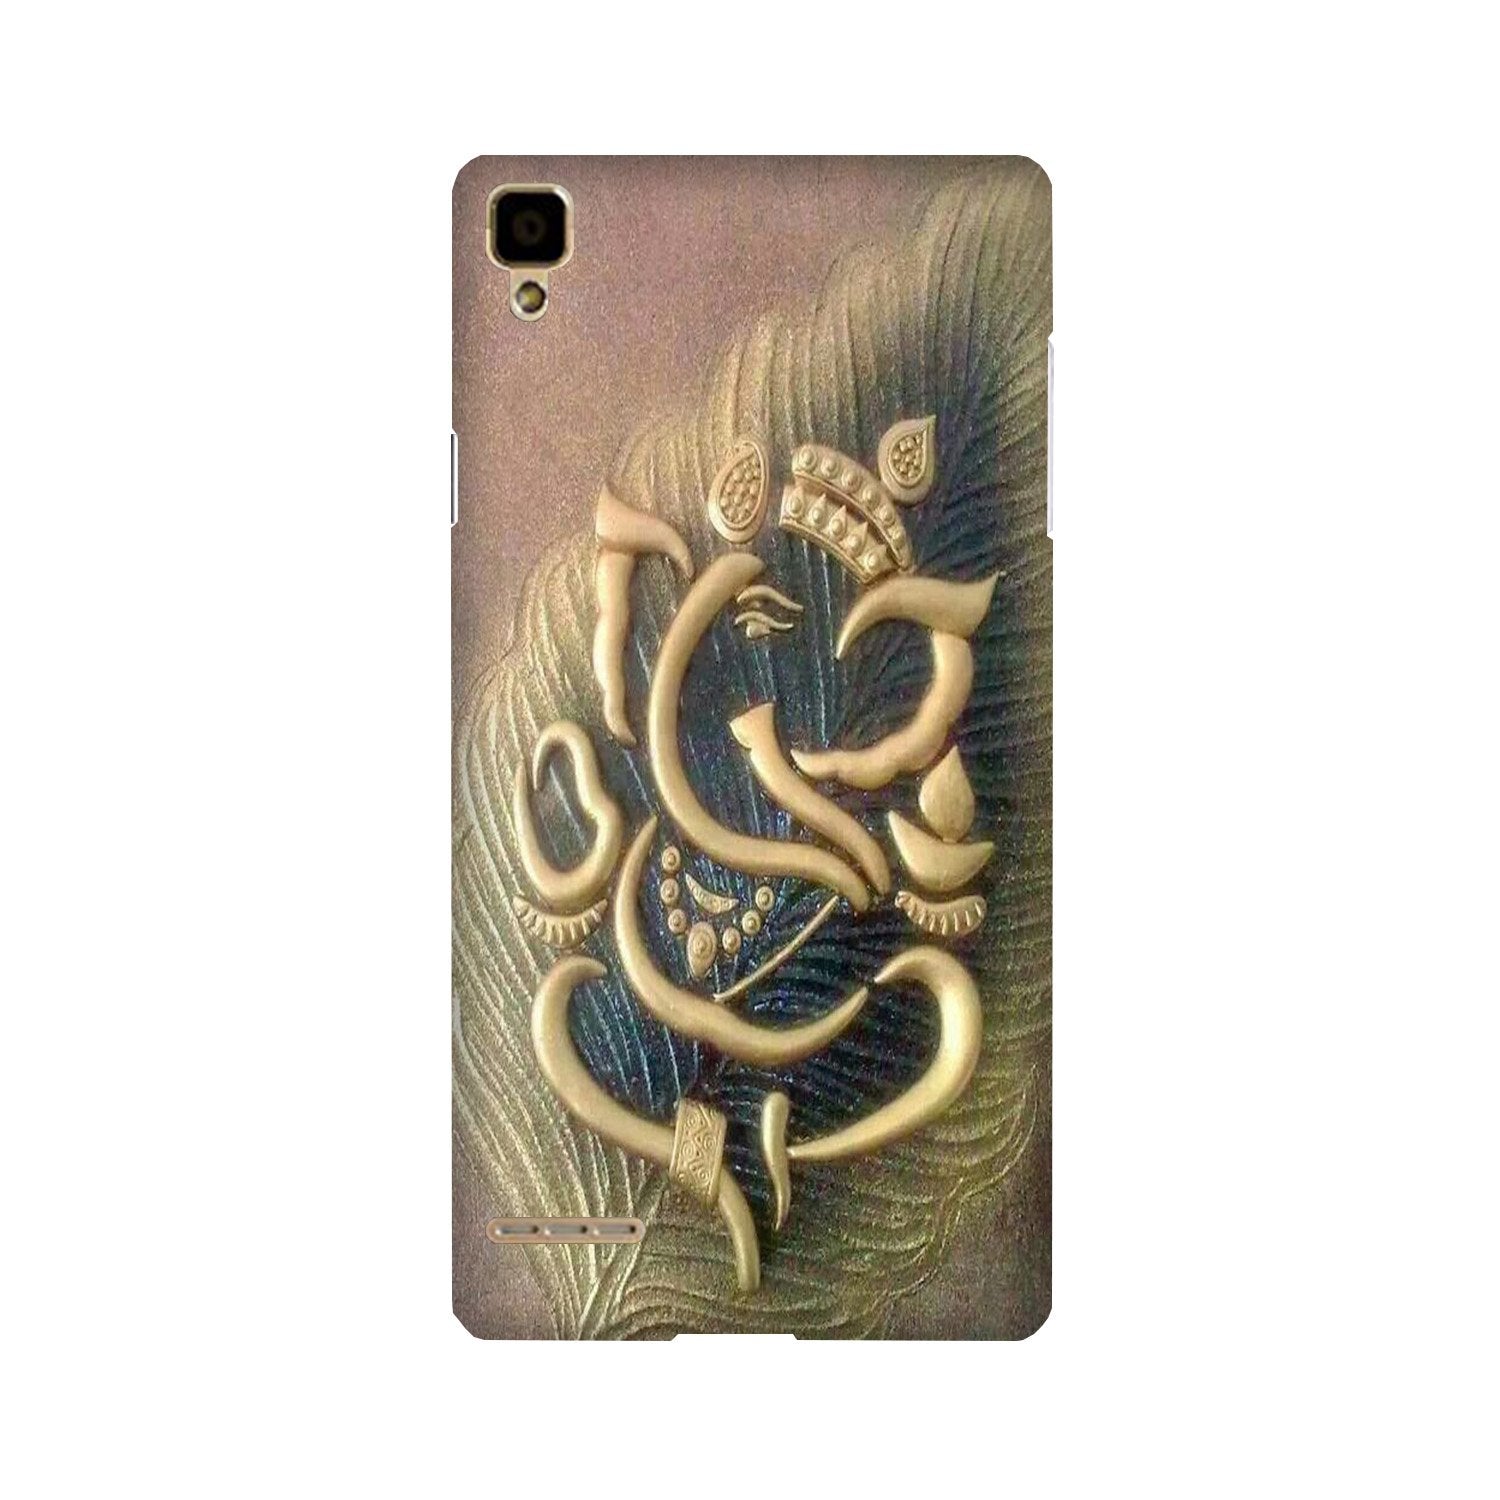 Lord Ganesha Case for Oppo F1